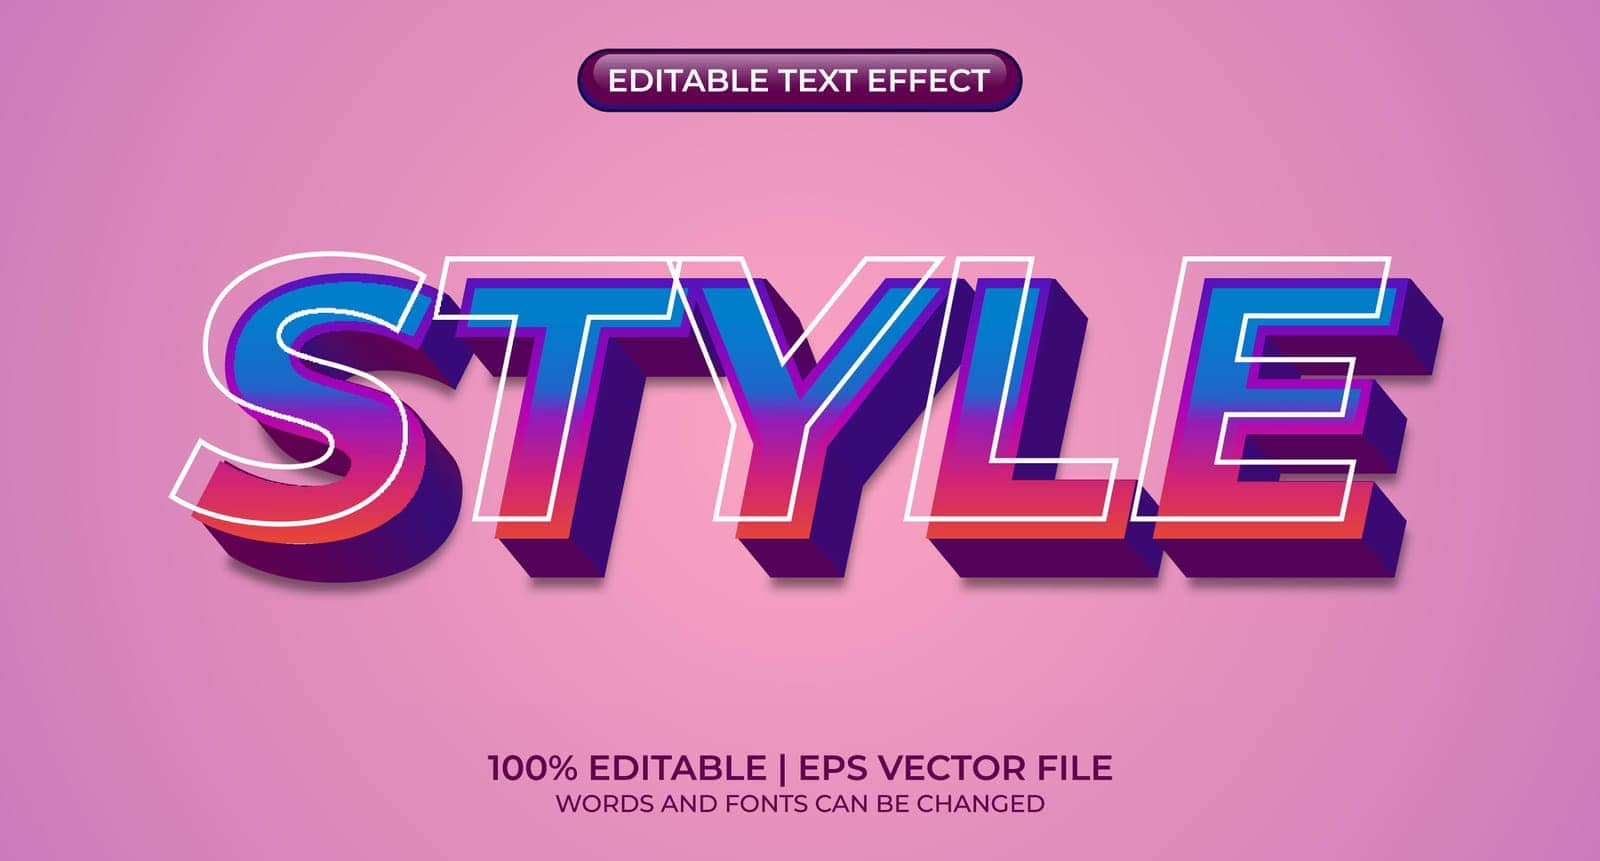 Editable text effects - Style text effects by Aozora